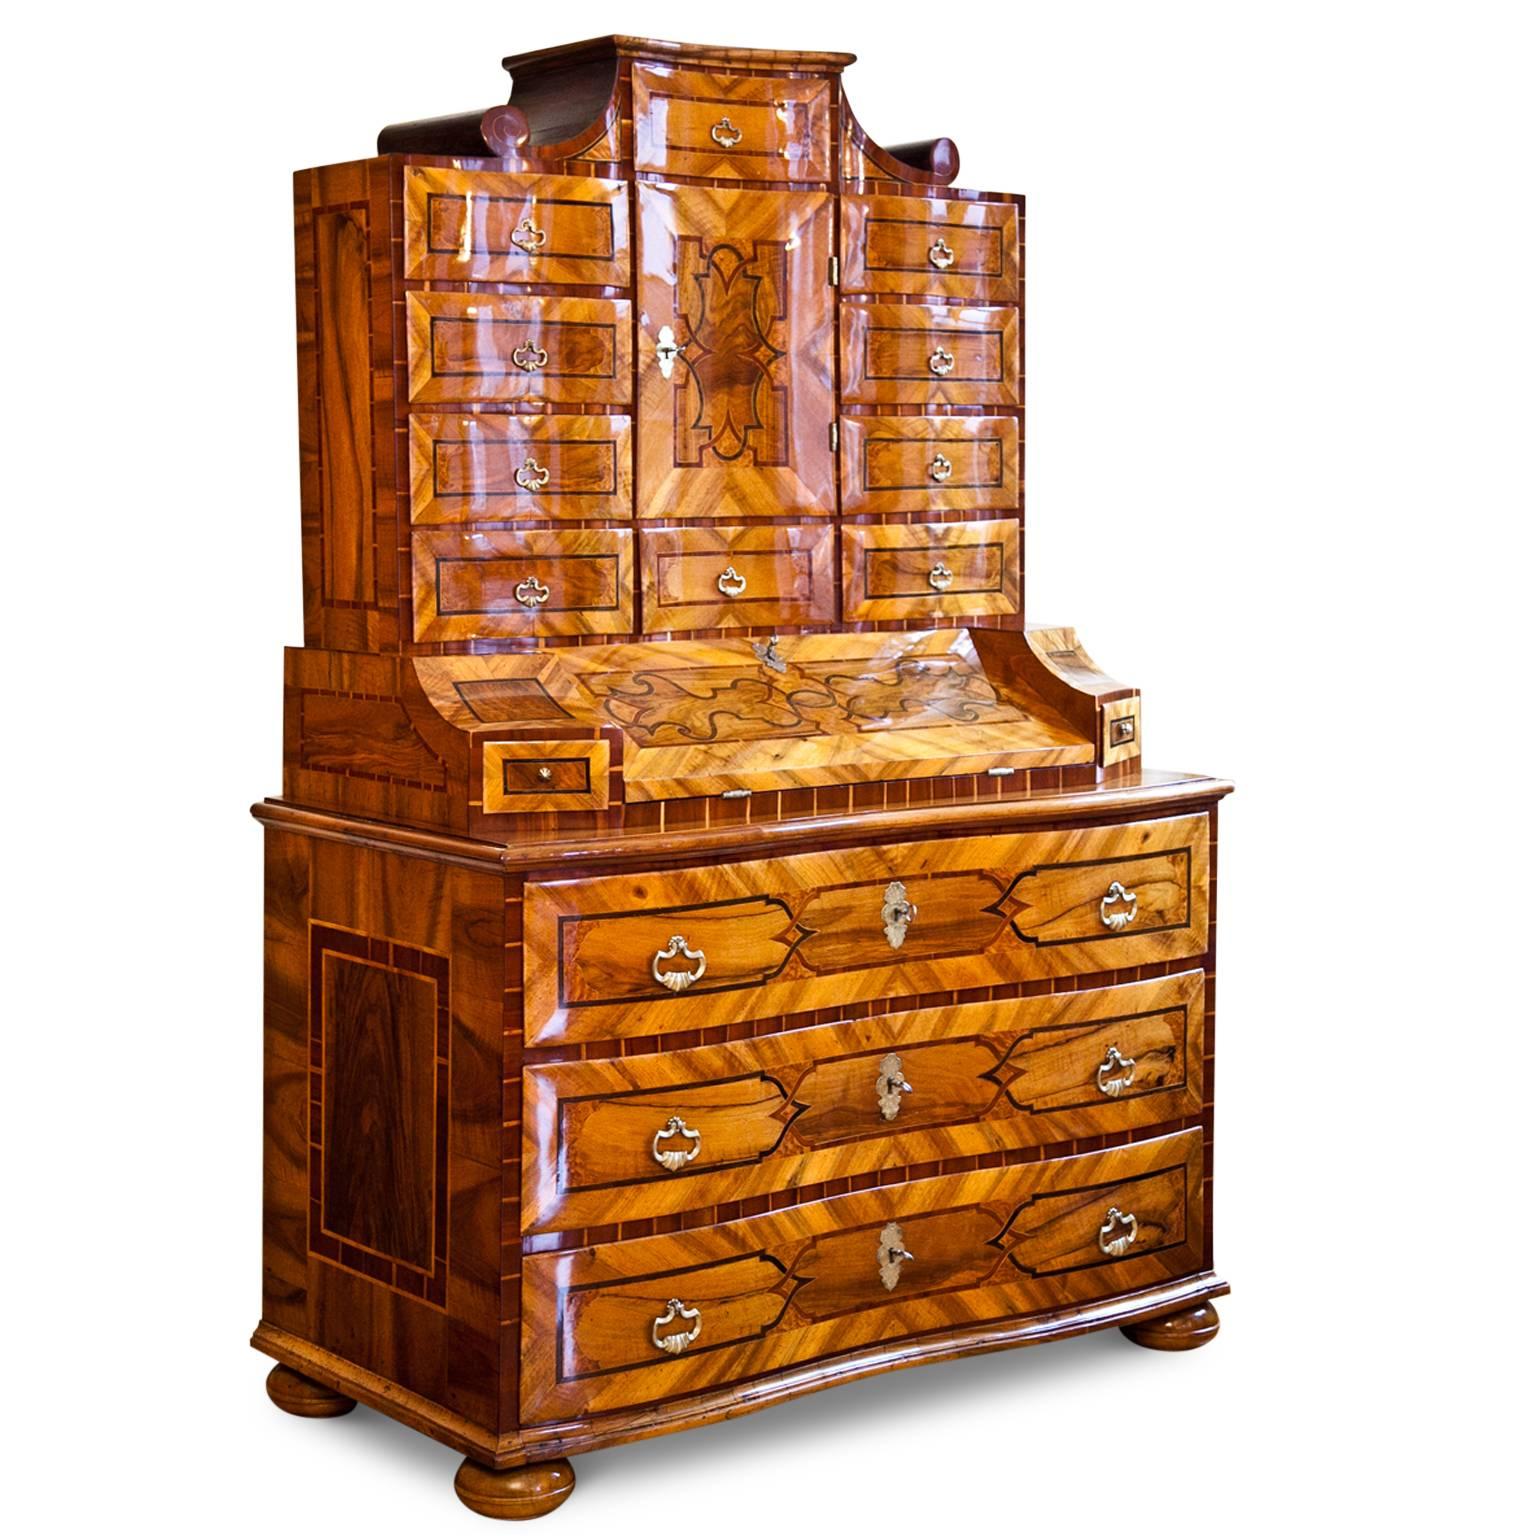 Baroque Tabernacle Secretaire on bun feet with a three-drawered chest of drawers base and a serpentine front. The writing surface is at a height of 87.5 cm and has three more drawers on the inside. The top part shows multiple drawers and a raised